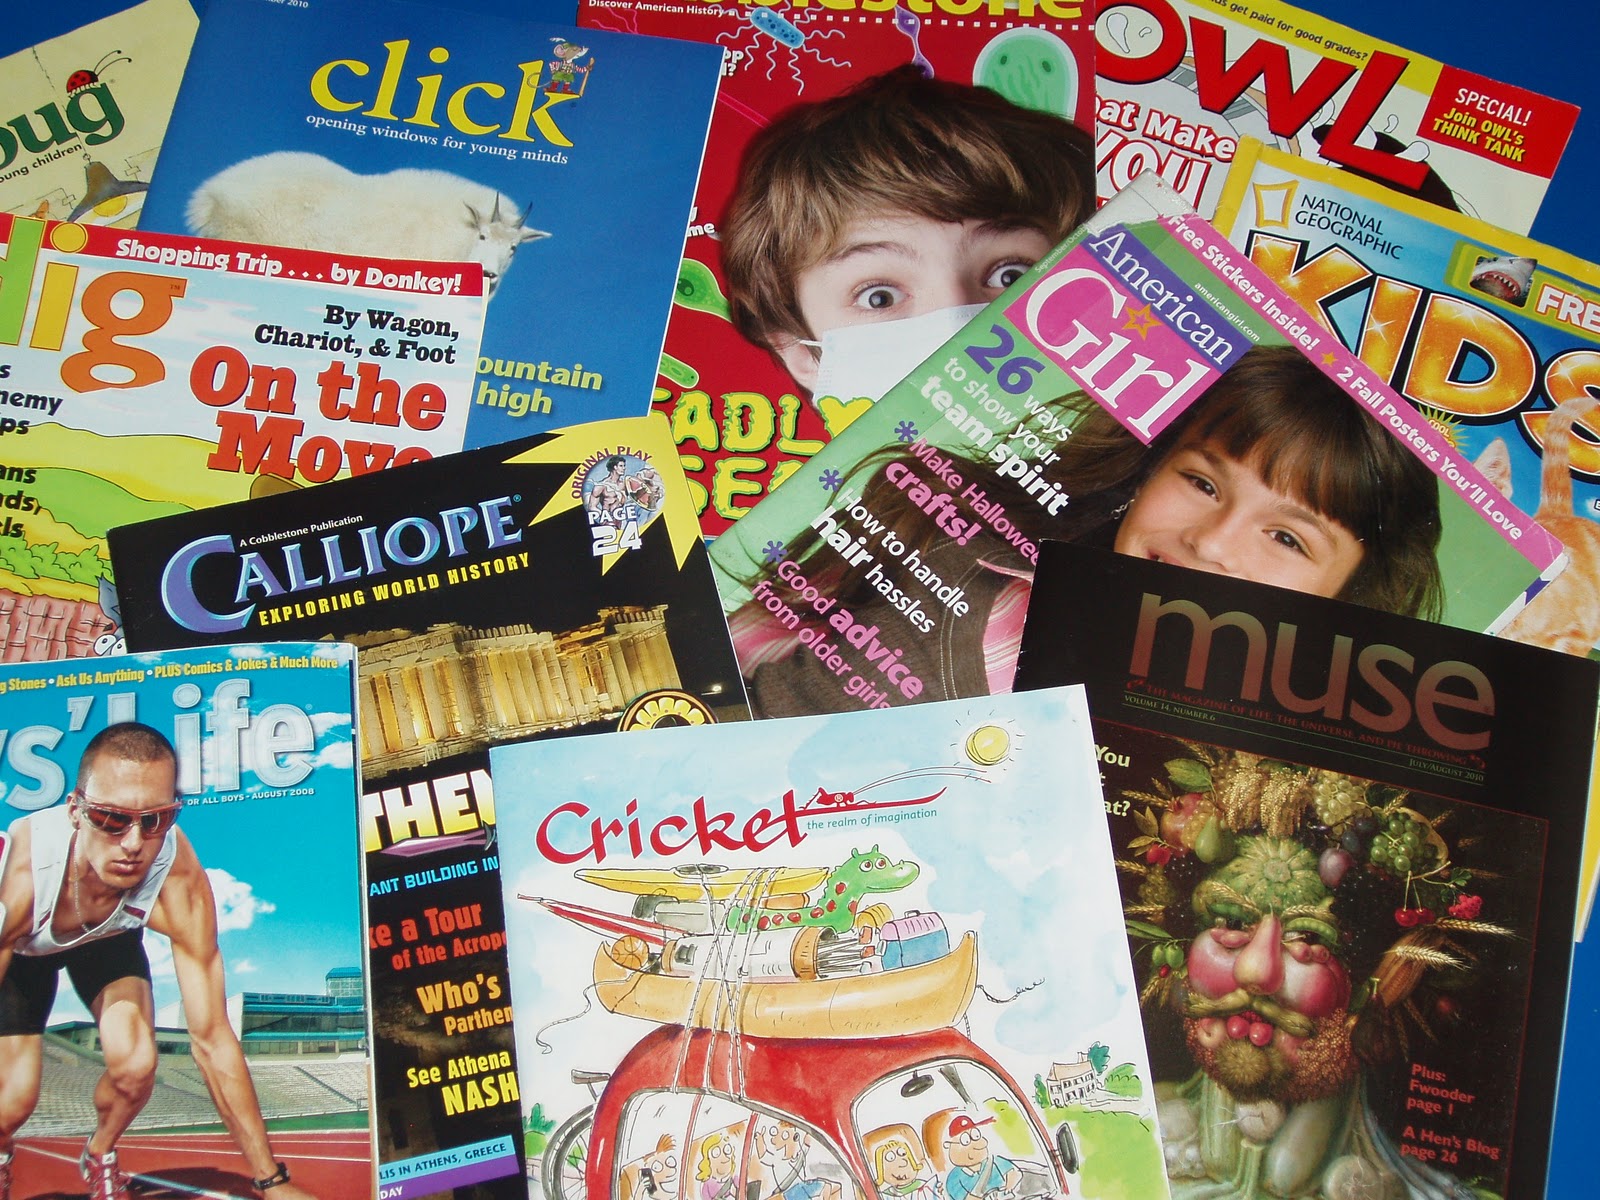 Wrote stories for magazines. Magazine for Kids. Журналистские журналы. English Magazine for children. Magazines for Kids English.